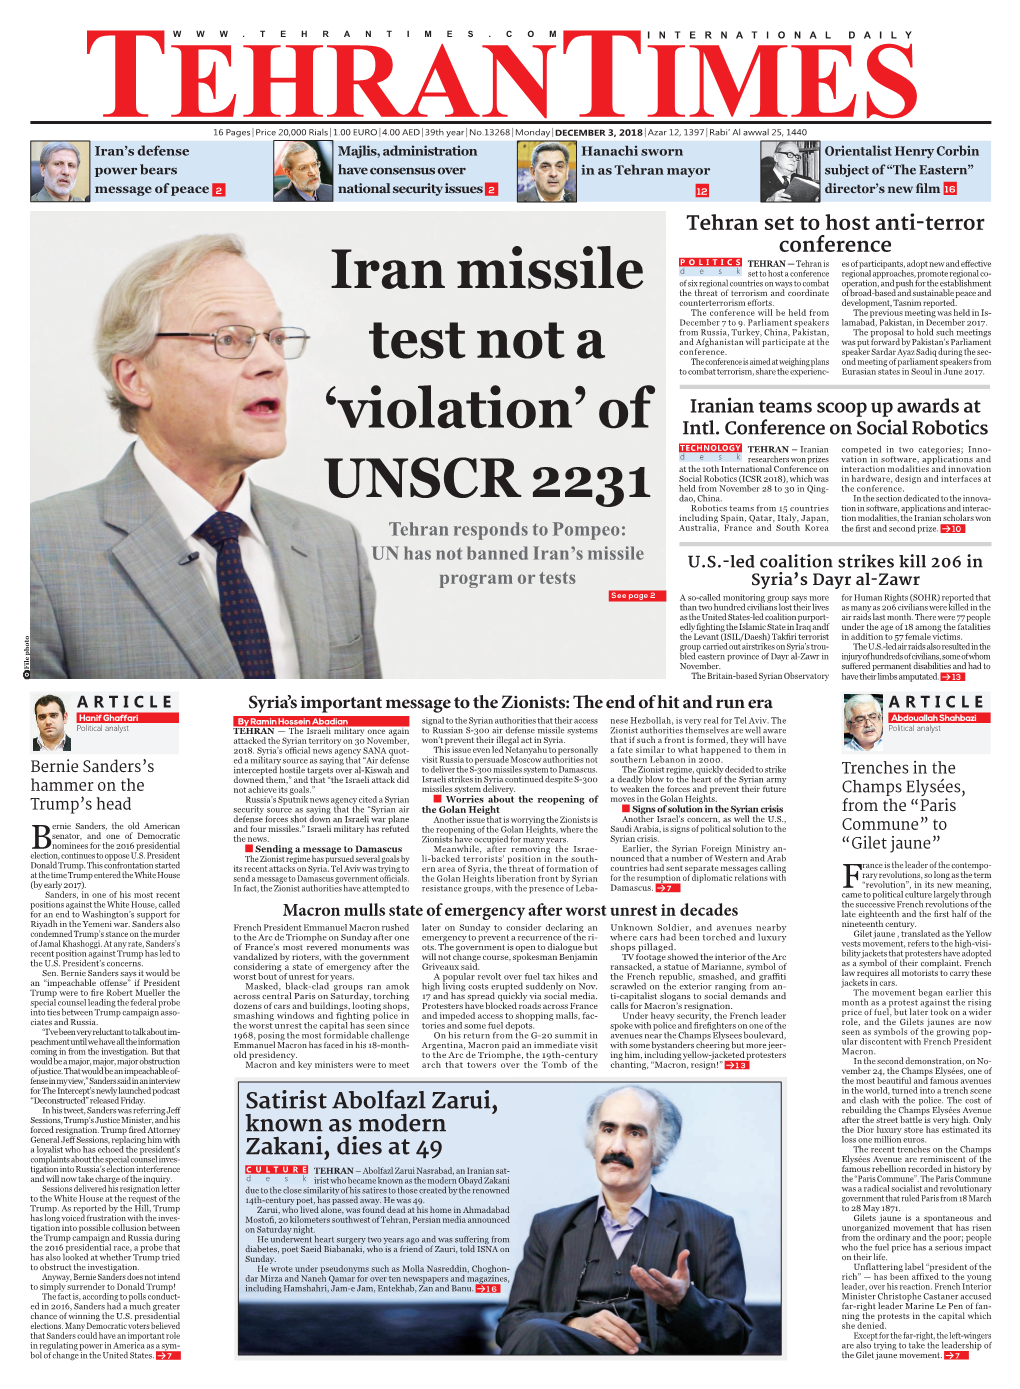 Iran Missile Test Not a 'Violation' of UNSCR 2231